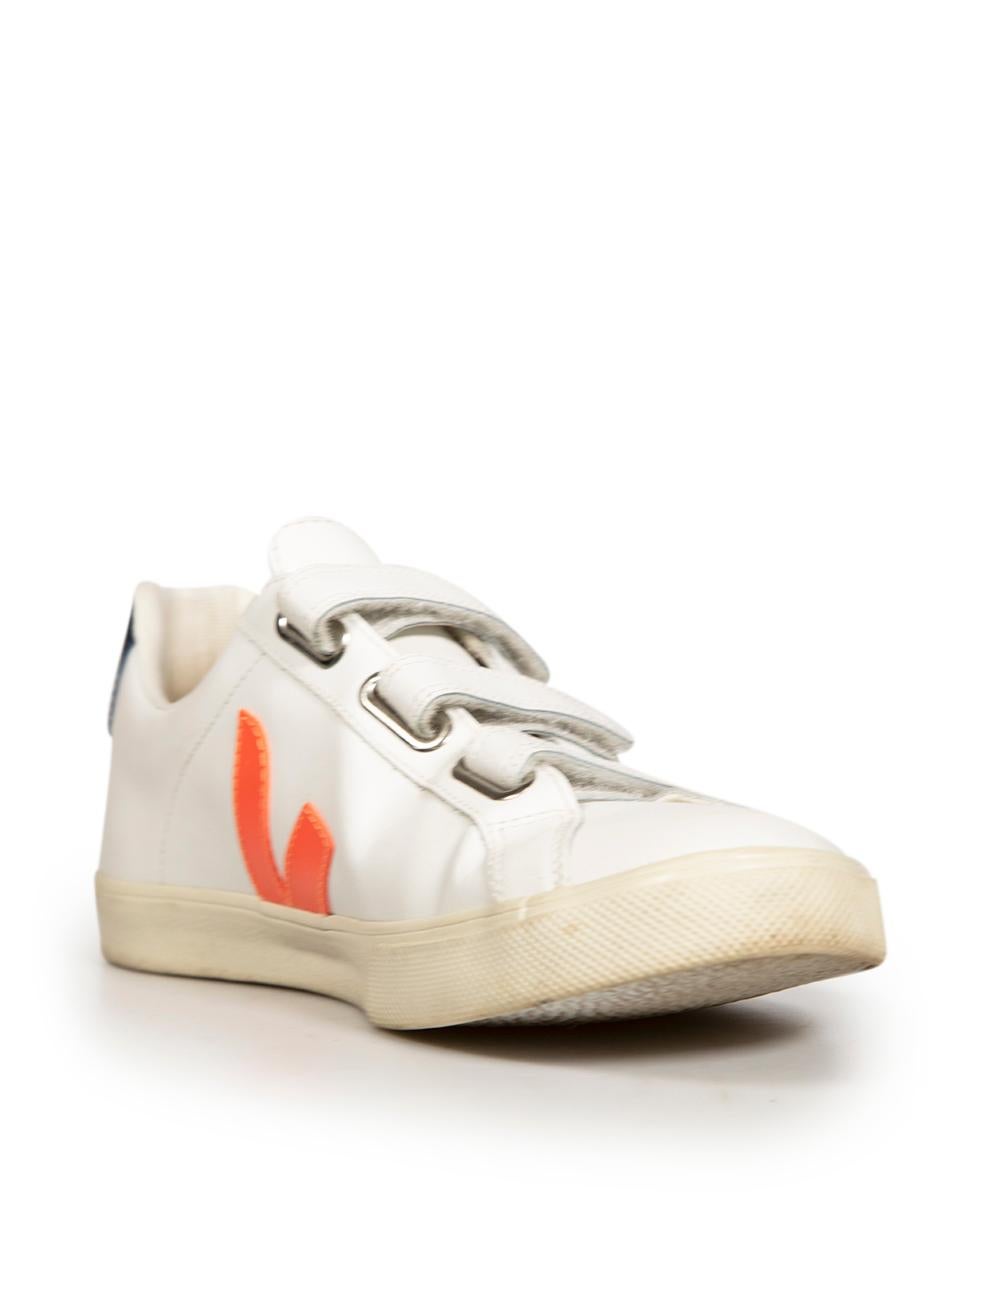 CONDITION is Good. Minor wear to shoes is evident. Light wear to the left-side of the left shoe and the right shoe tongue with discoloured marks to the leather. Both shoes also have marks to the rubber soles on this used Veja designer resale item.
